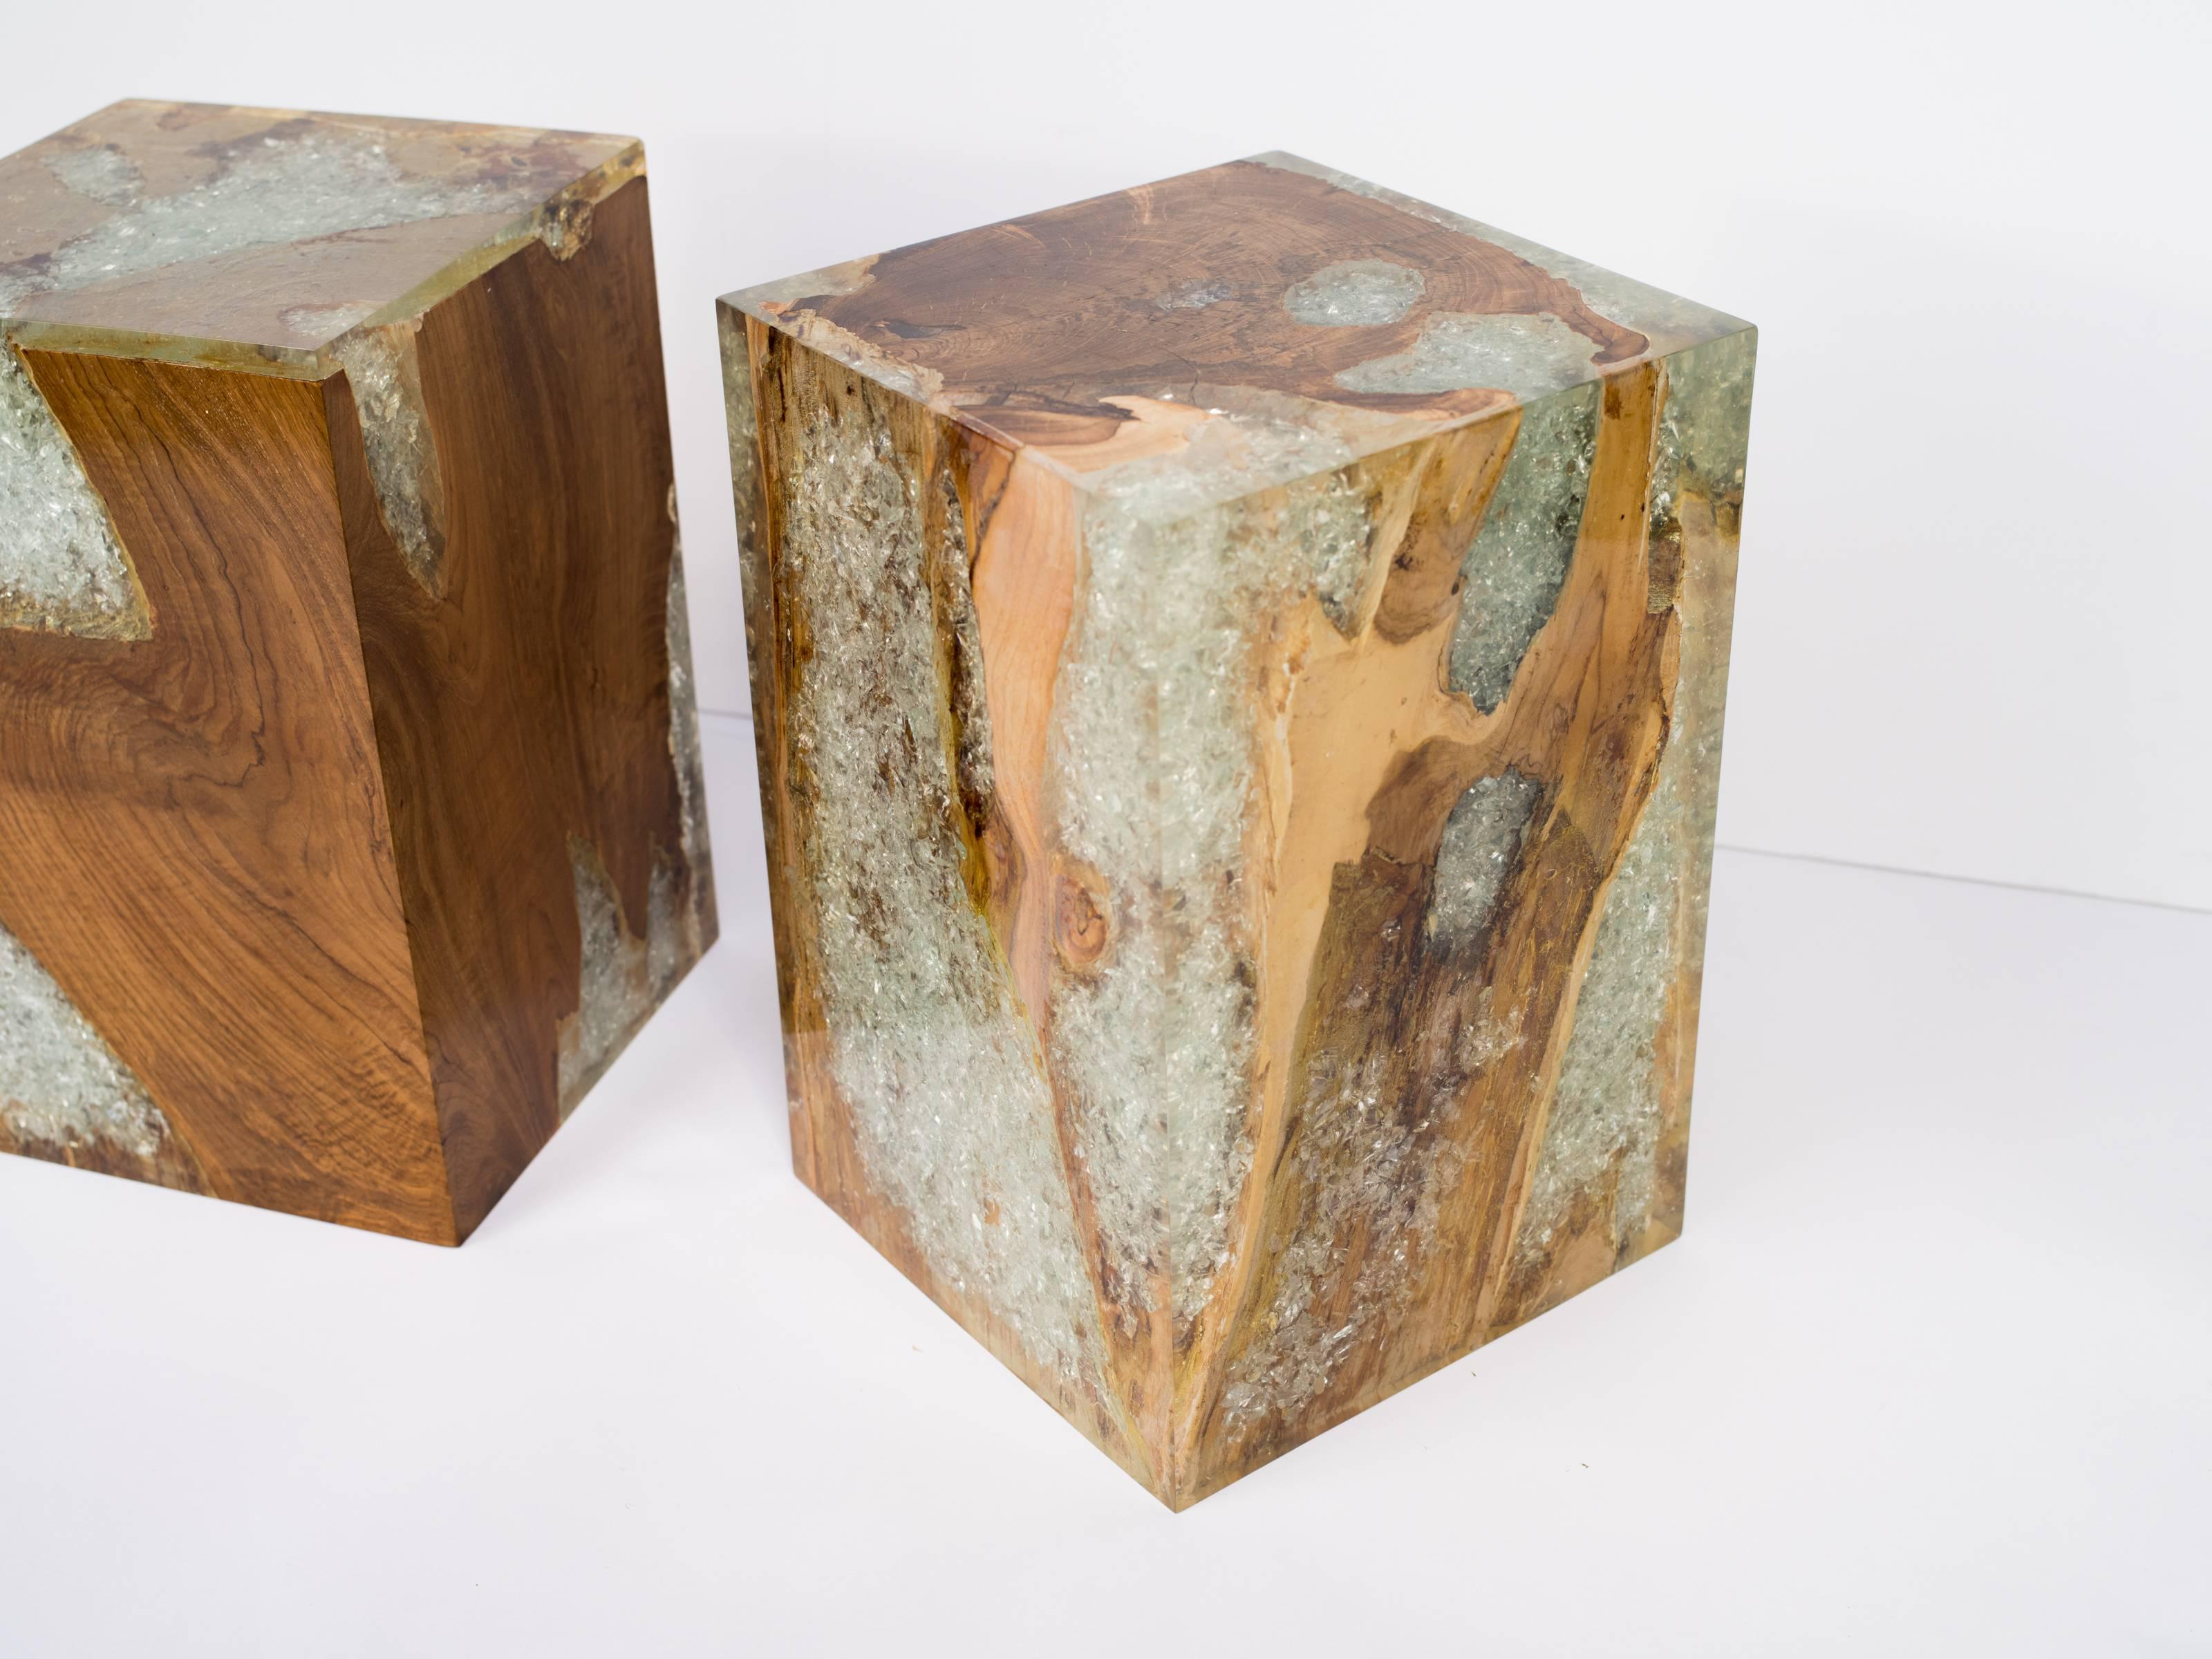 Pair of Indonesian Bleached Teak Wood and Cracked Resin Side Tables In Excellent Condition For Sale In Fort Lauderdale, FL